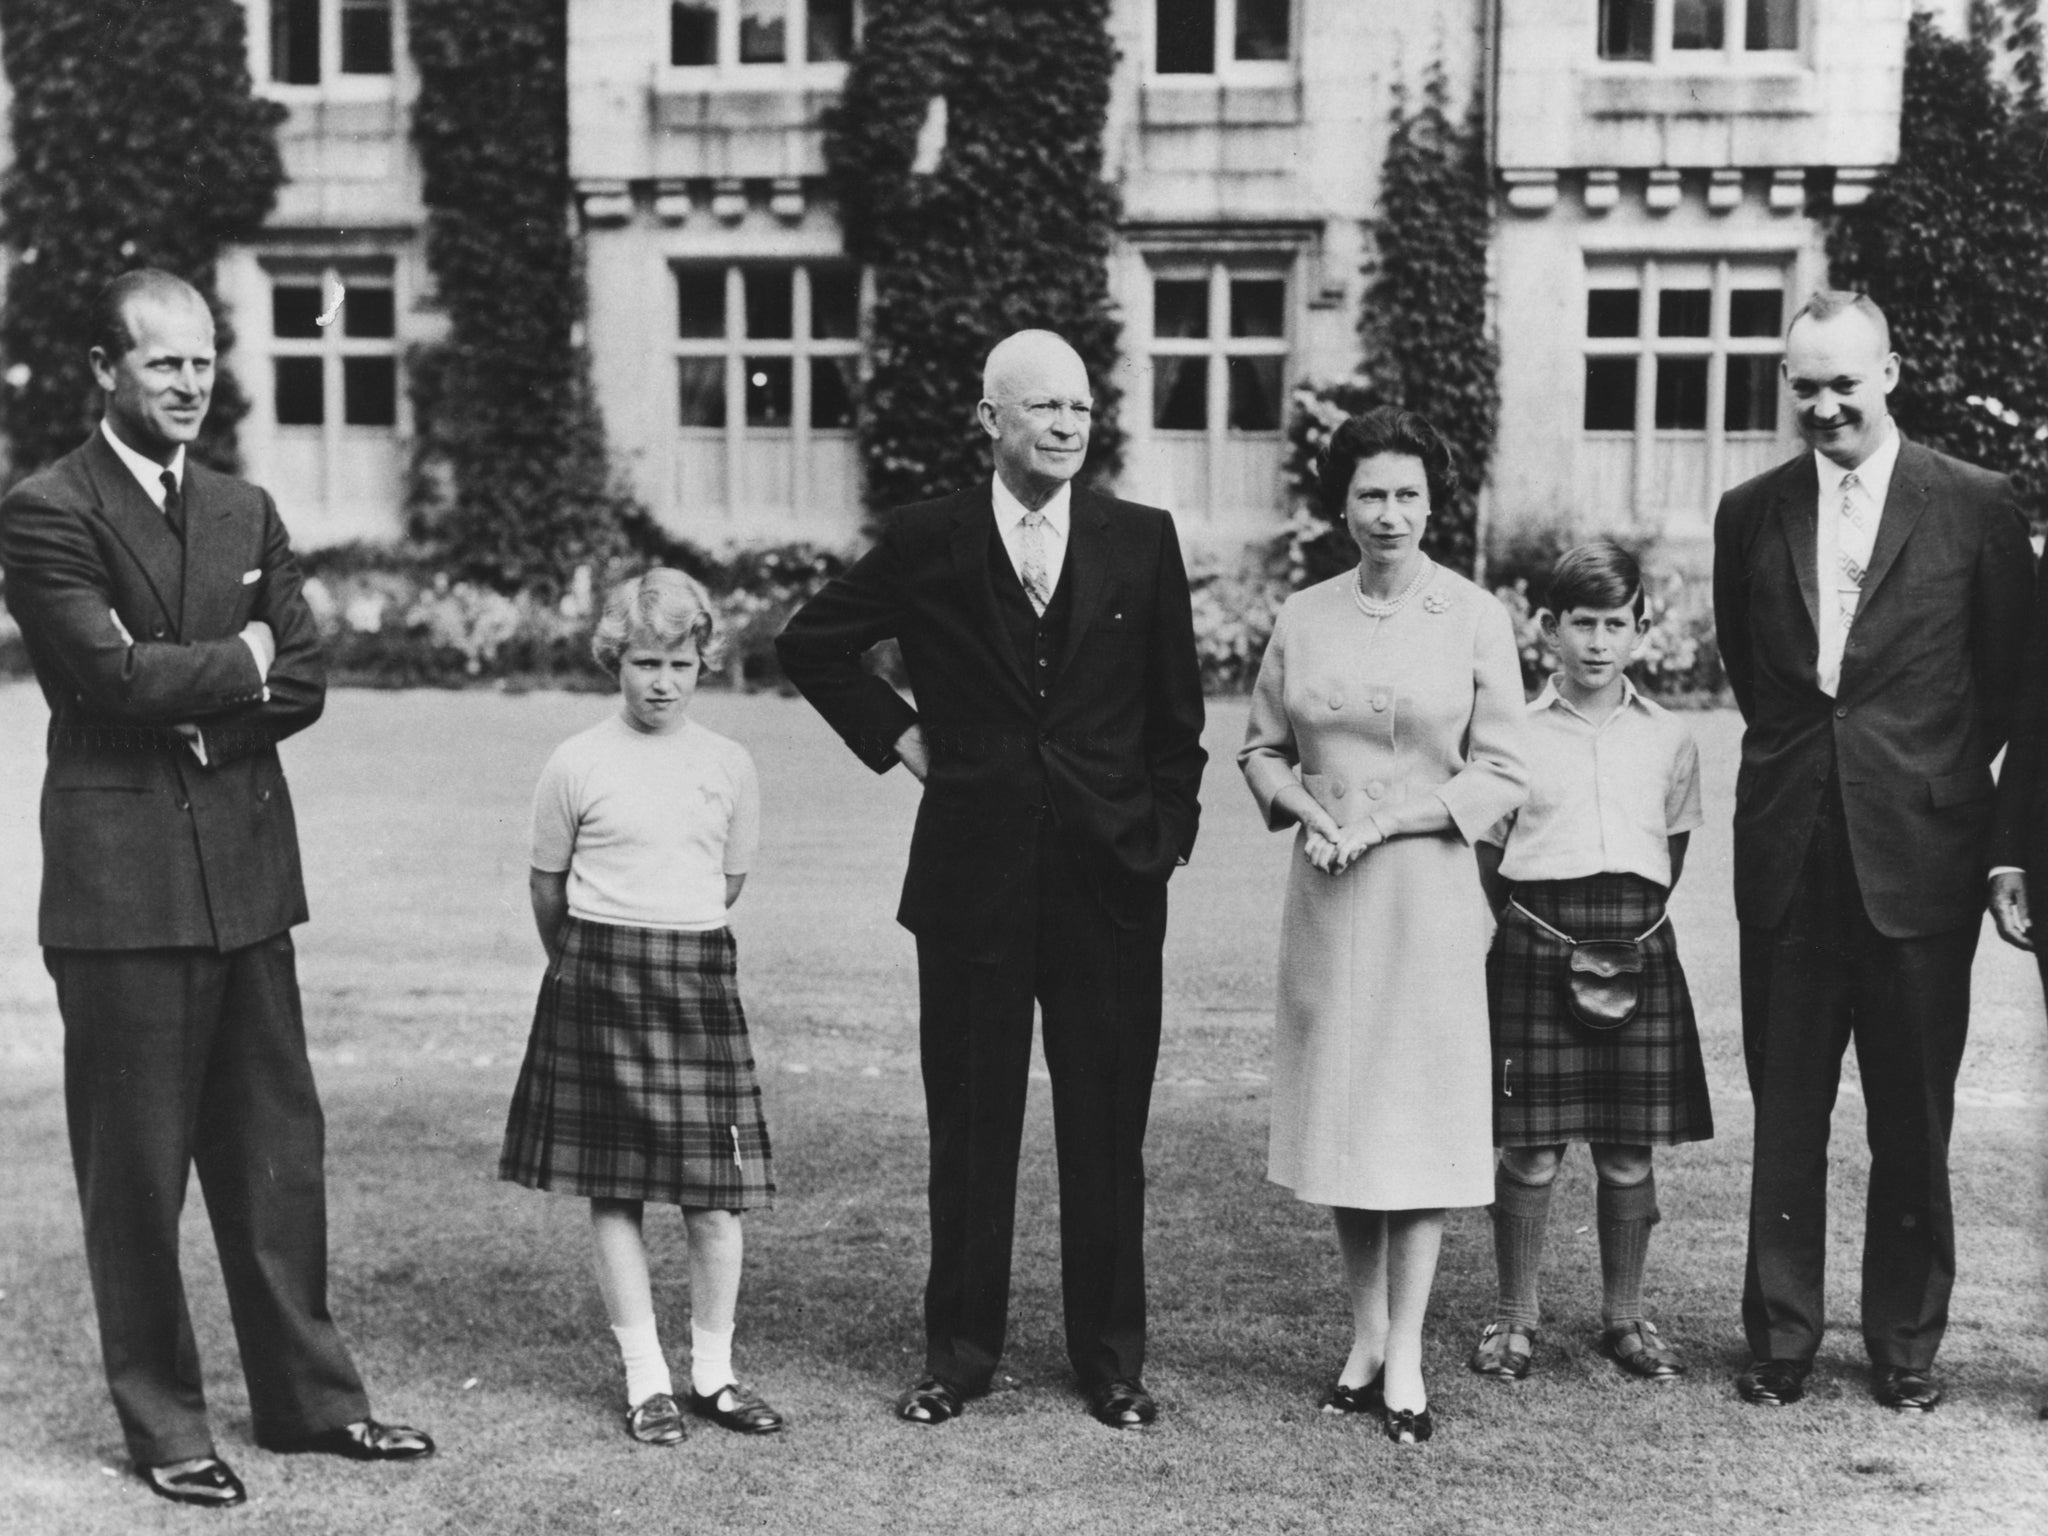 President Eisenhower (centre) with the British Royal family (left to right) Prince Philip, Princess Anne, HM Queen Elizabeth, Prince Charles and Captain John Eisenhower, at Balmoral Castle, Scotland, 1959